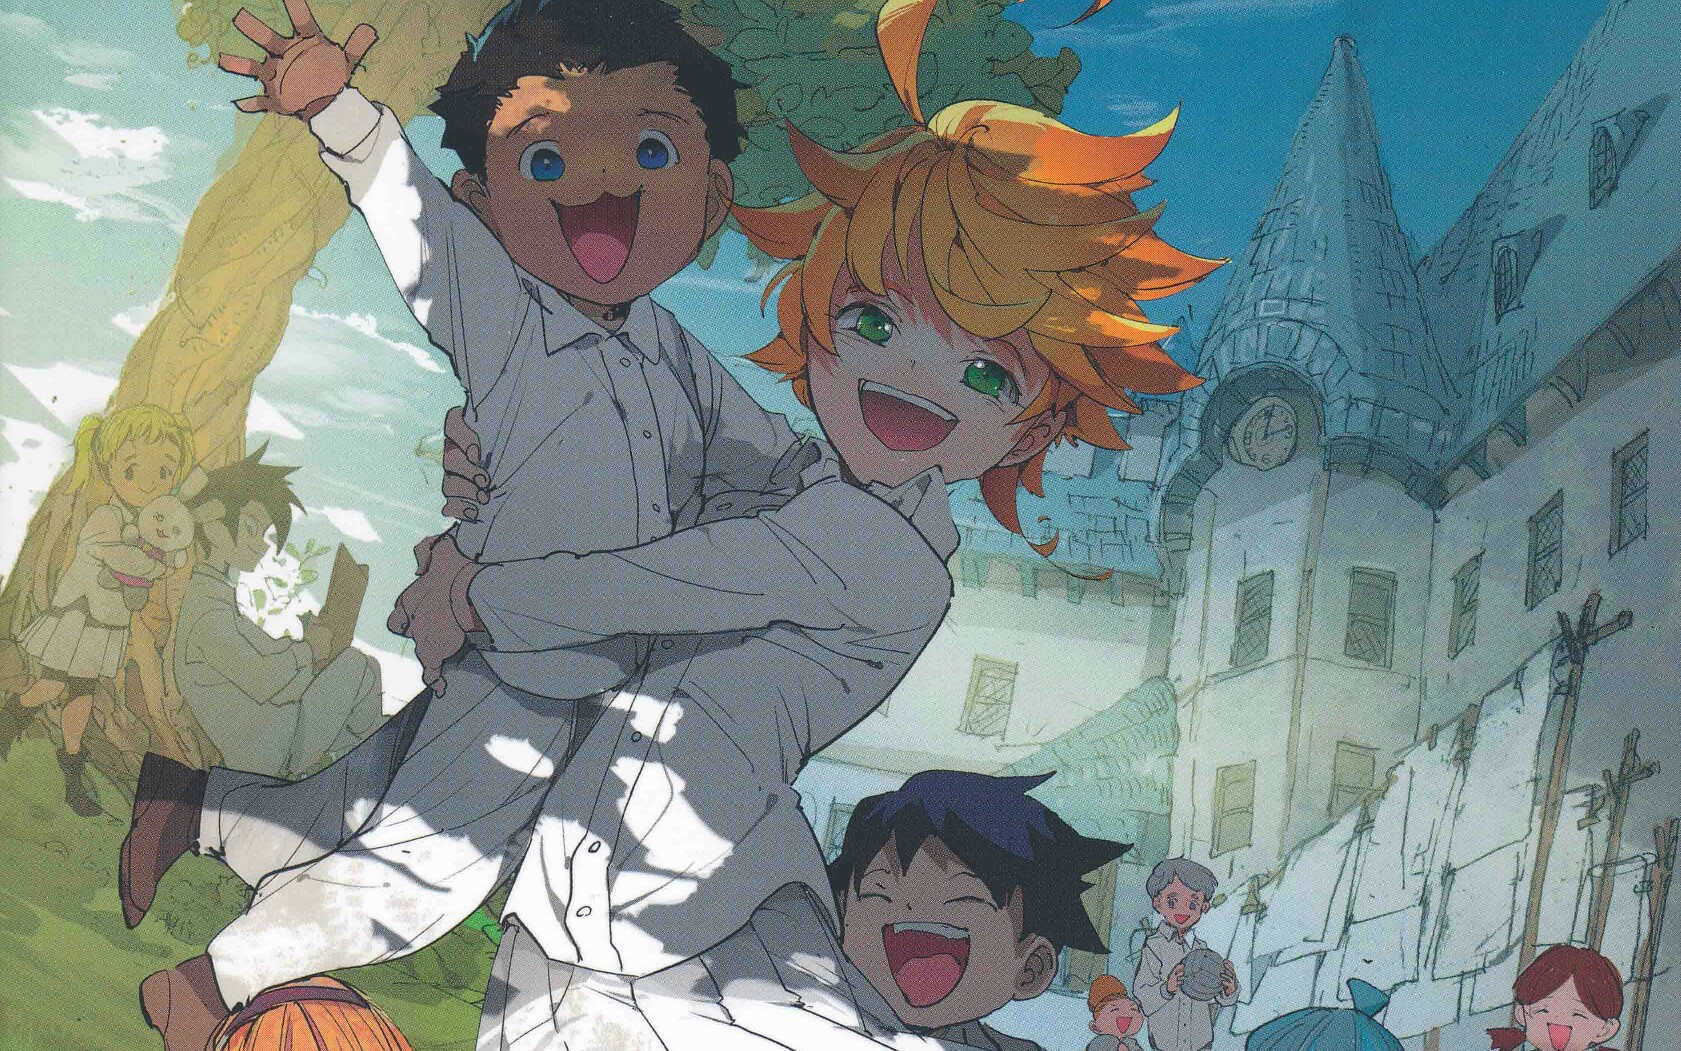 The Promised Neverland Gets Stunning New English Trailer